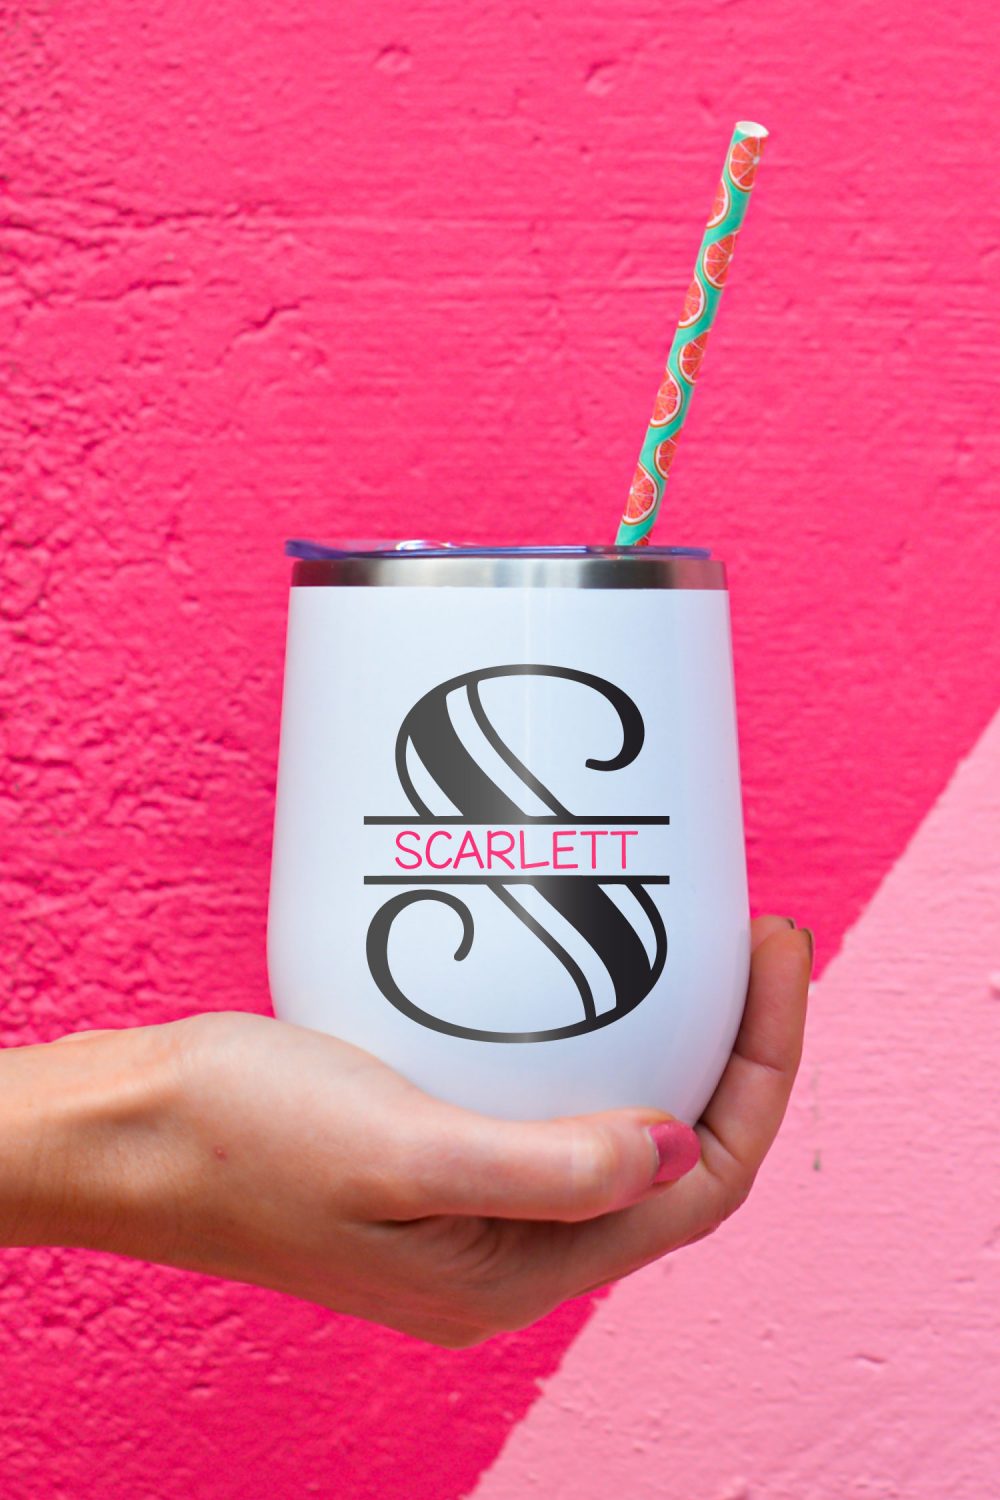 Finished monogram on a wine tumbler on a pink background.